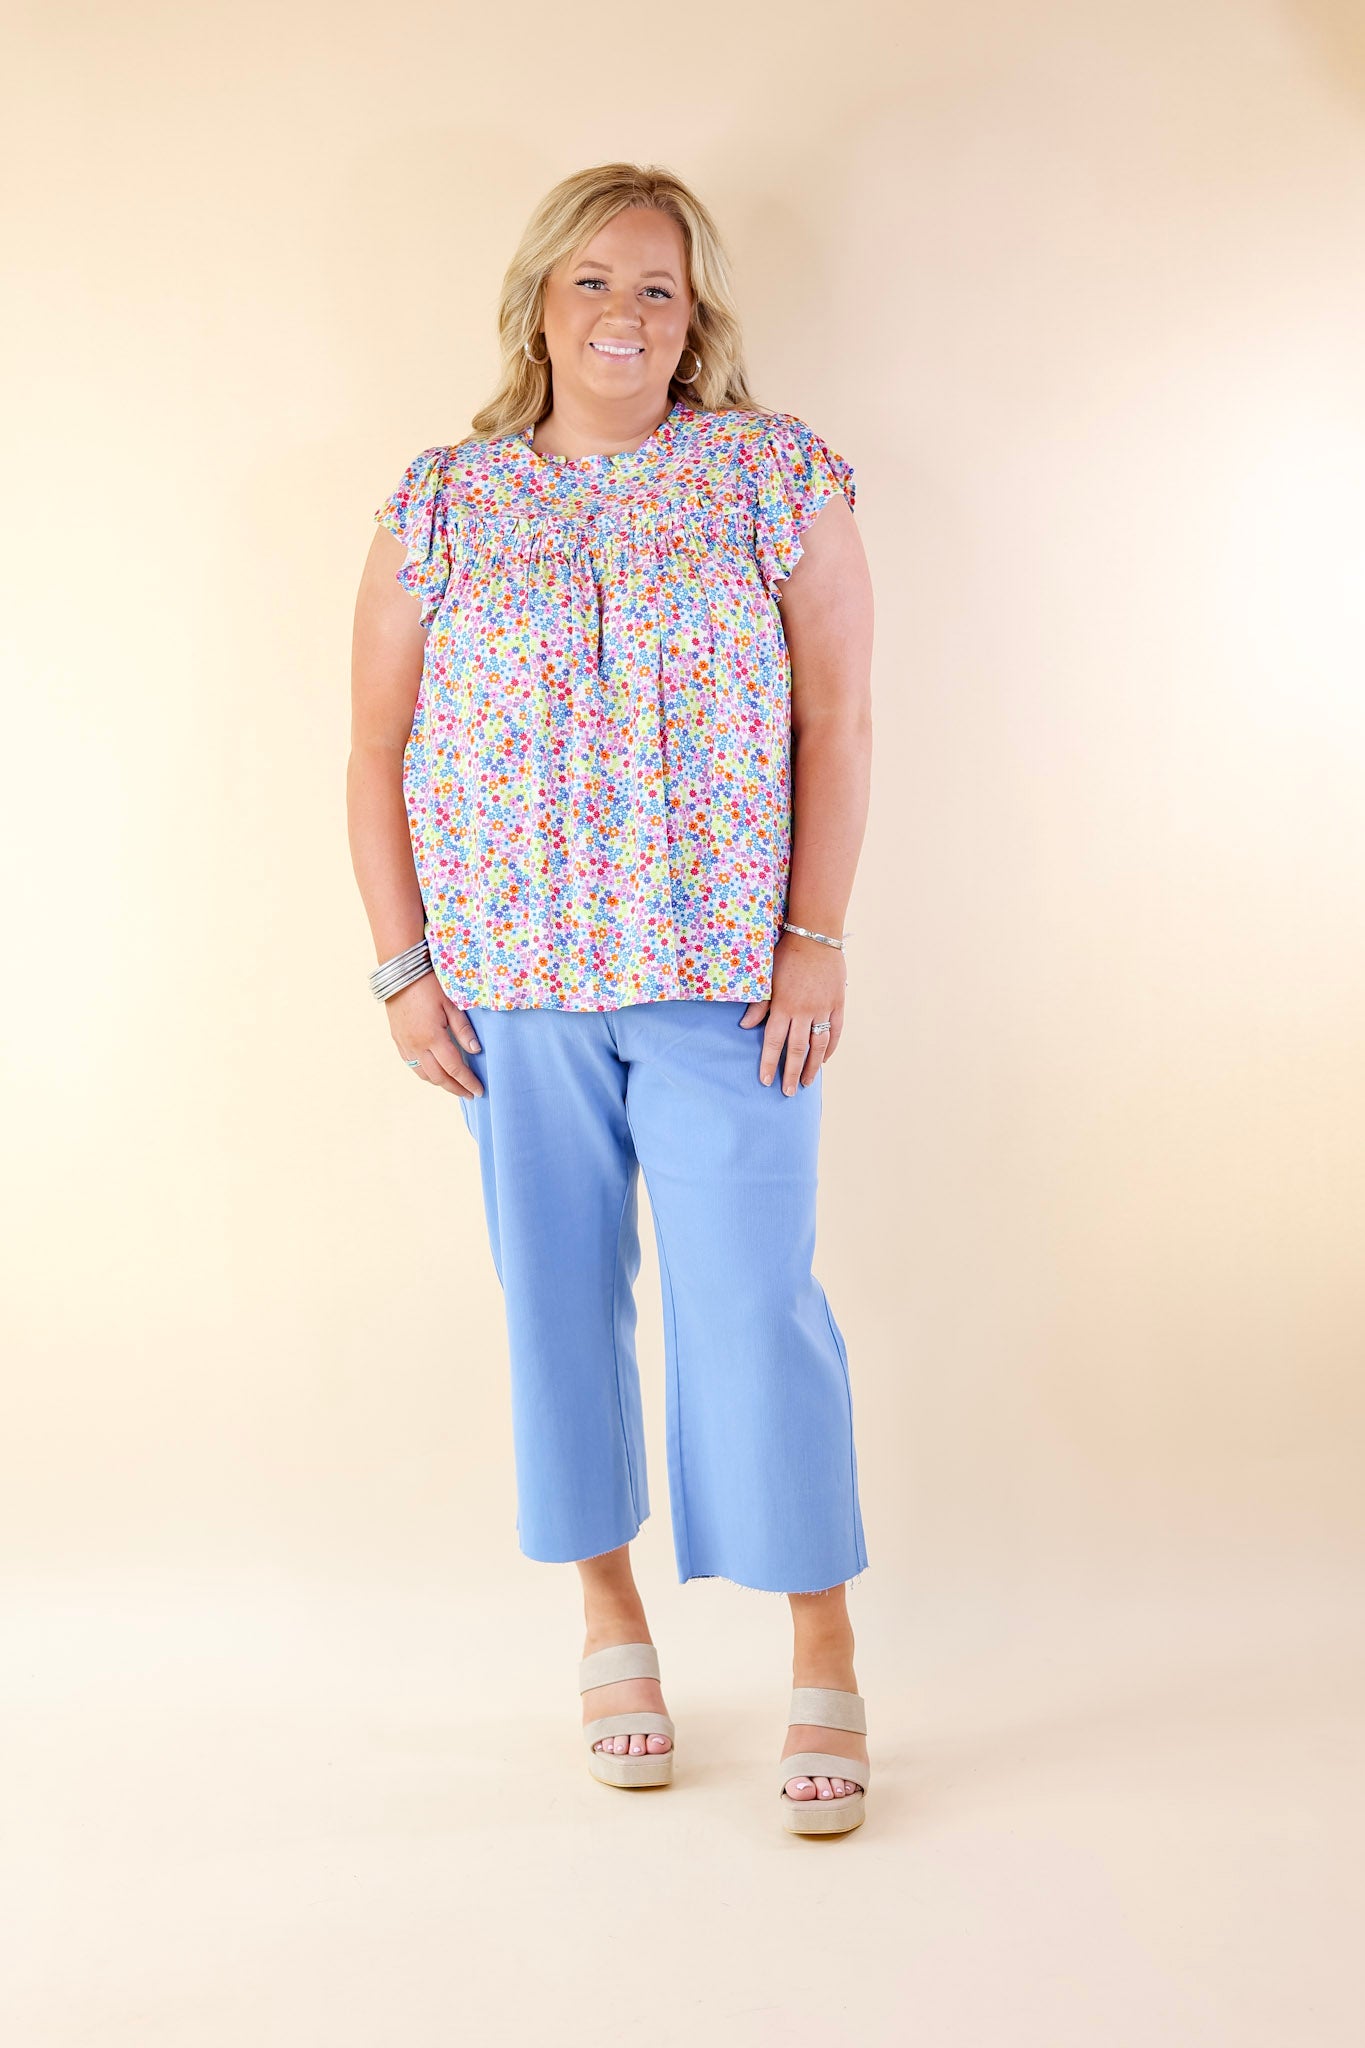 Fun Memories Floral Ruched Front Top with Ruffle Cap Sleeves in Blue Mix - Giddy Up Glamour Boutique